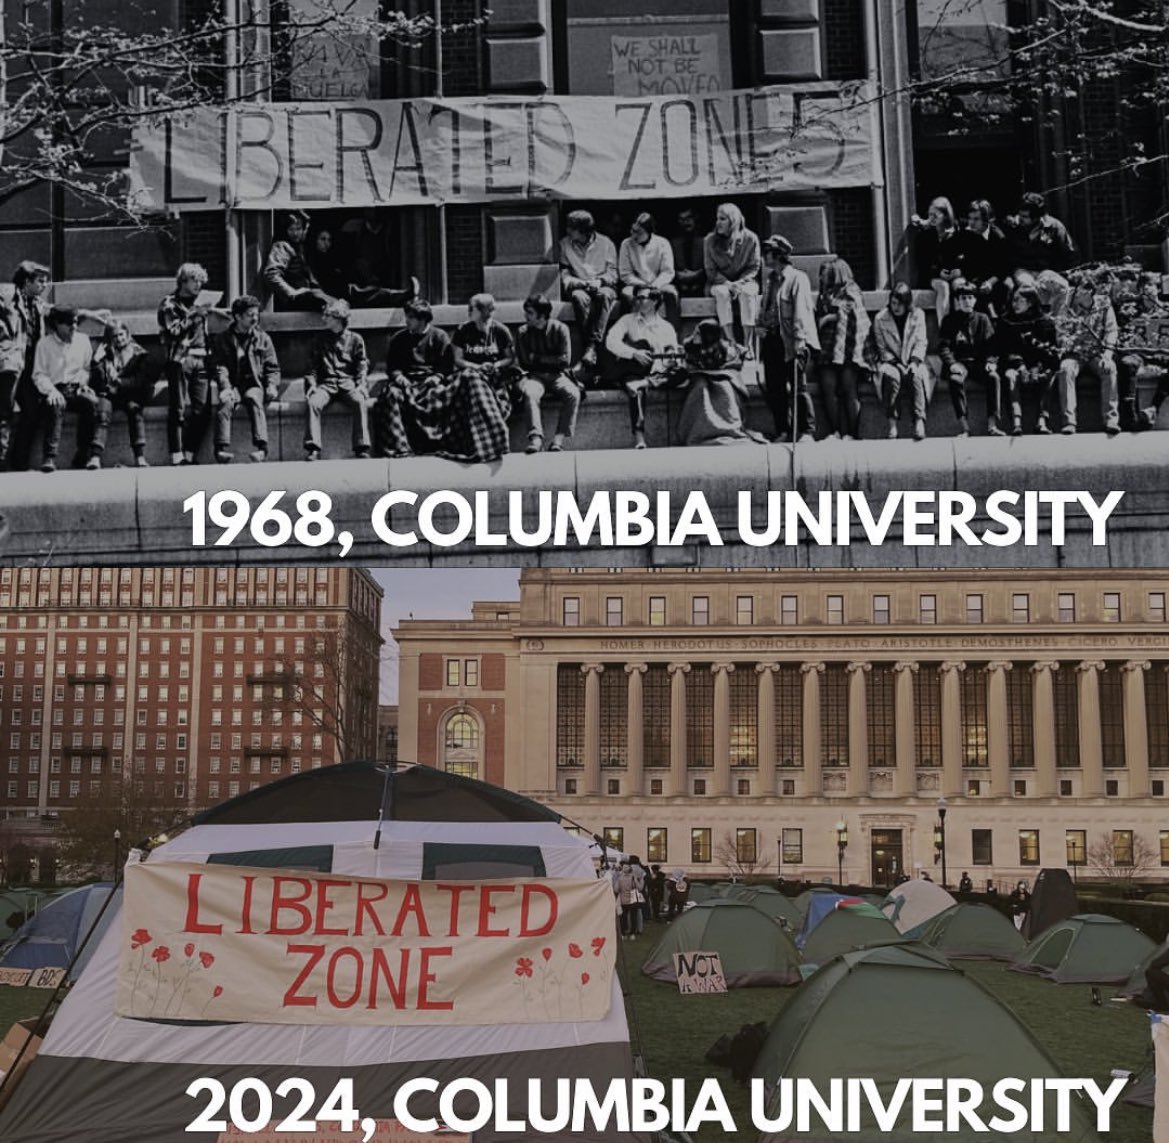 Columbia has always had an incredible history of students fighting for a more just world and it’s good to see that tradition continue. As NYPD surrounds young activists, I hope their concerns are heard by school administrators and they not be criminalized. In solidarity ✊🏽